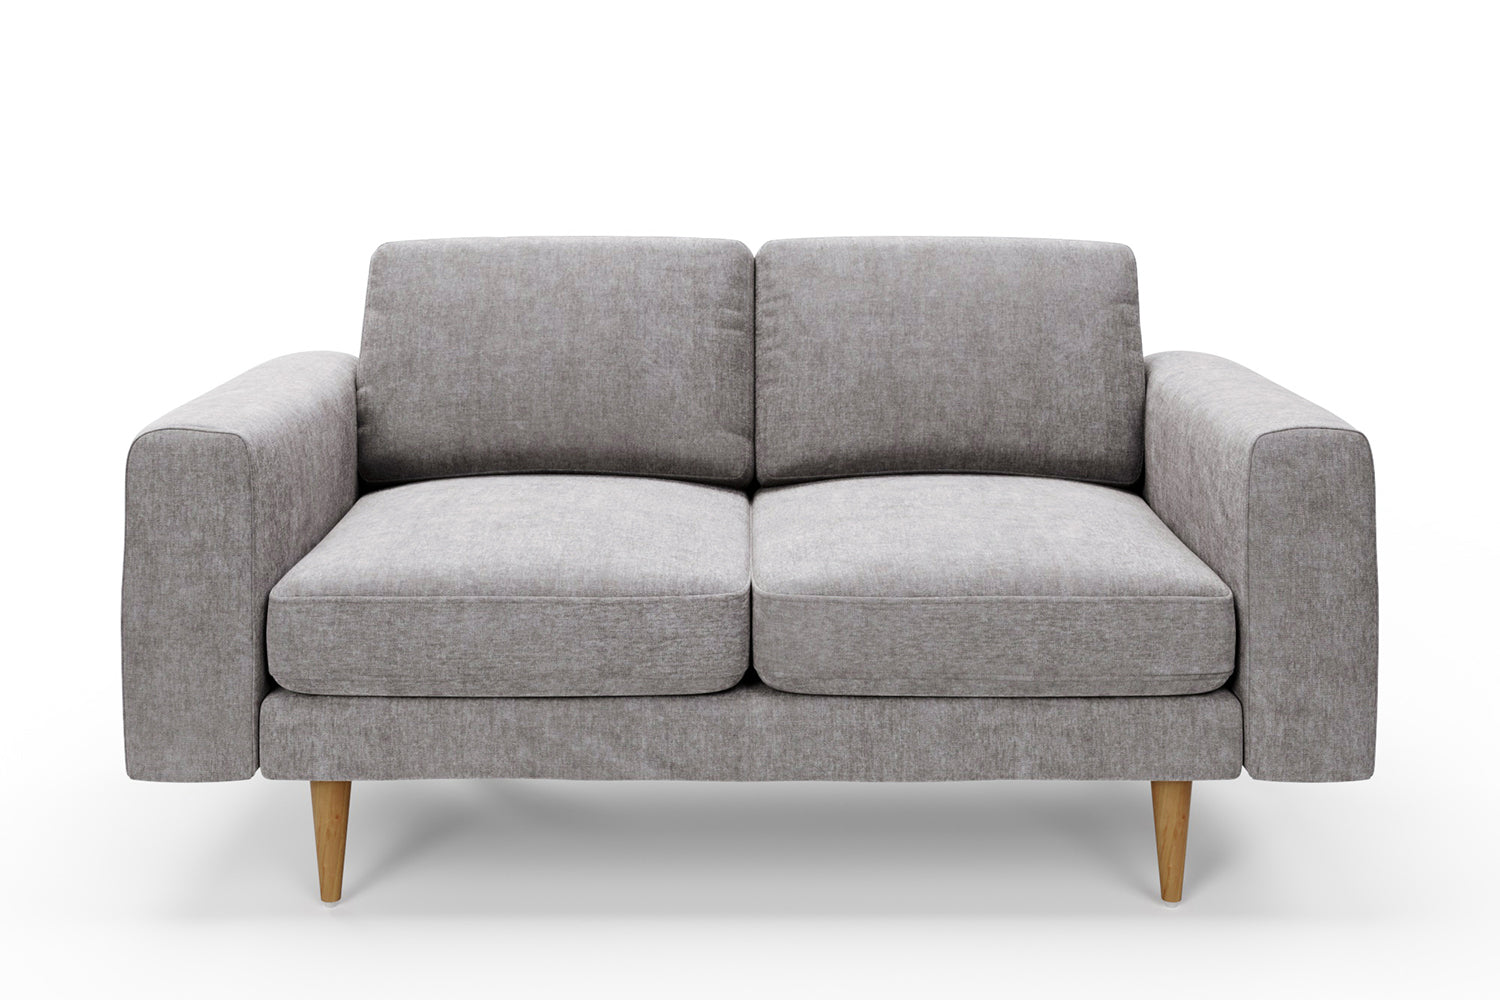 SNUG | The Big Chill 2 Seater Sofa in Mid Grey variant_40414877253680